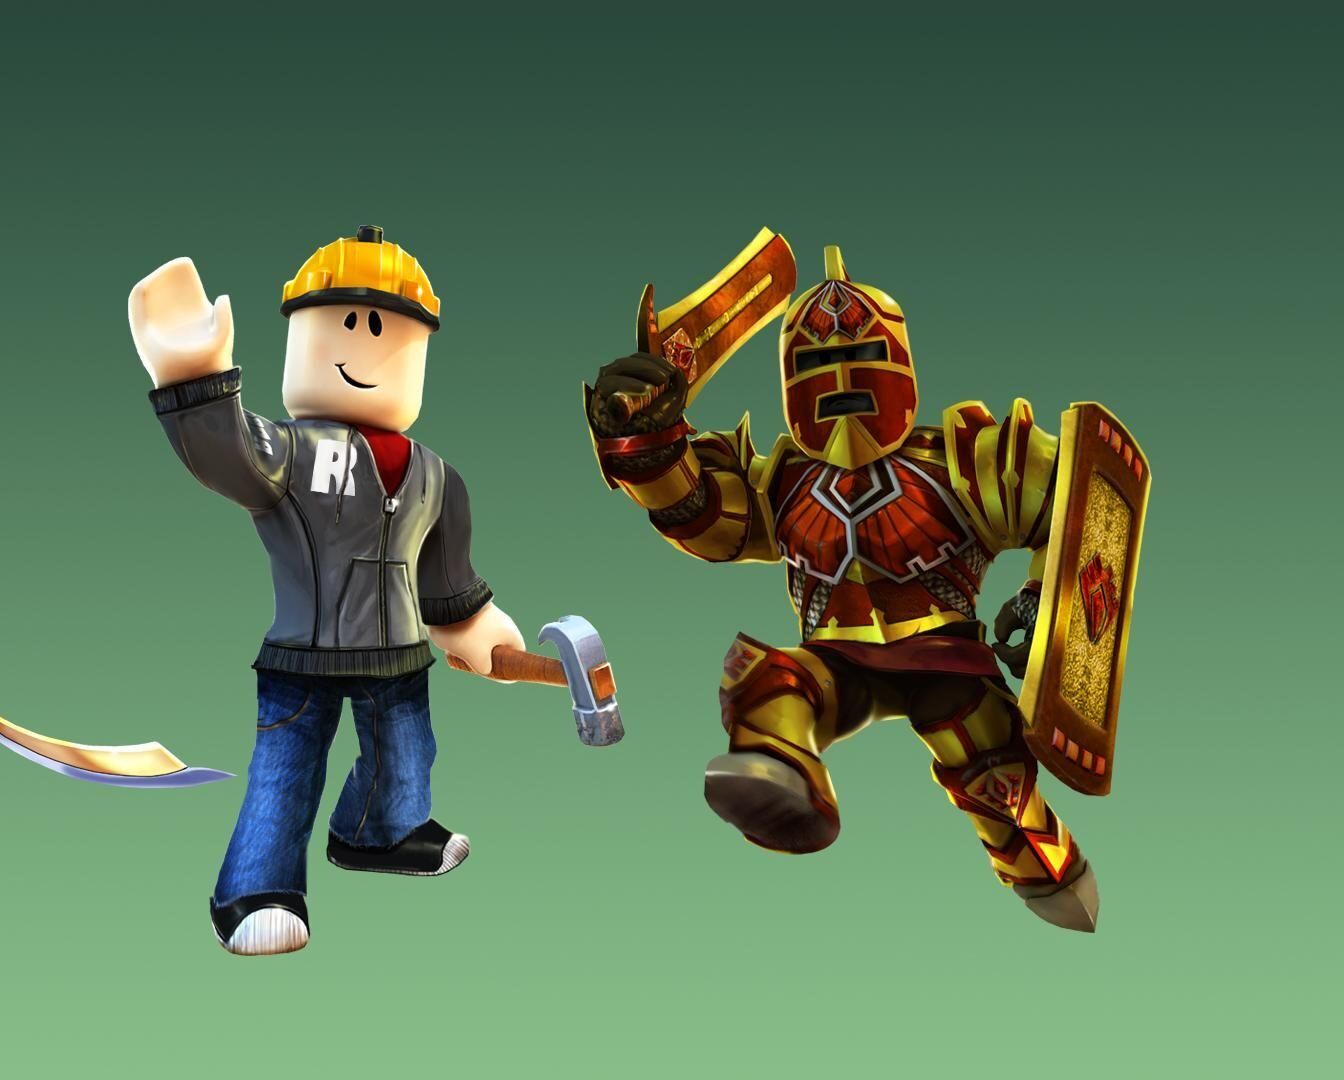 Roblox Noob Army Tycoon Codes (November 2022): How to Redeem and more